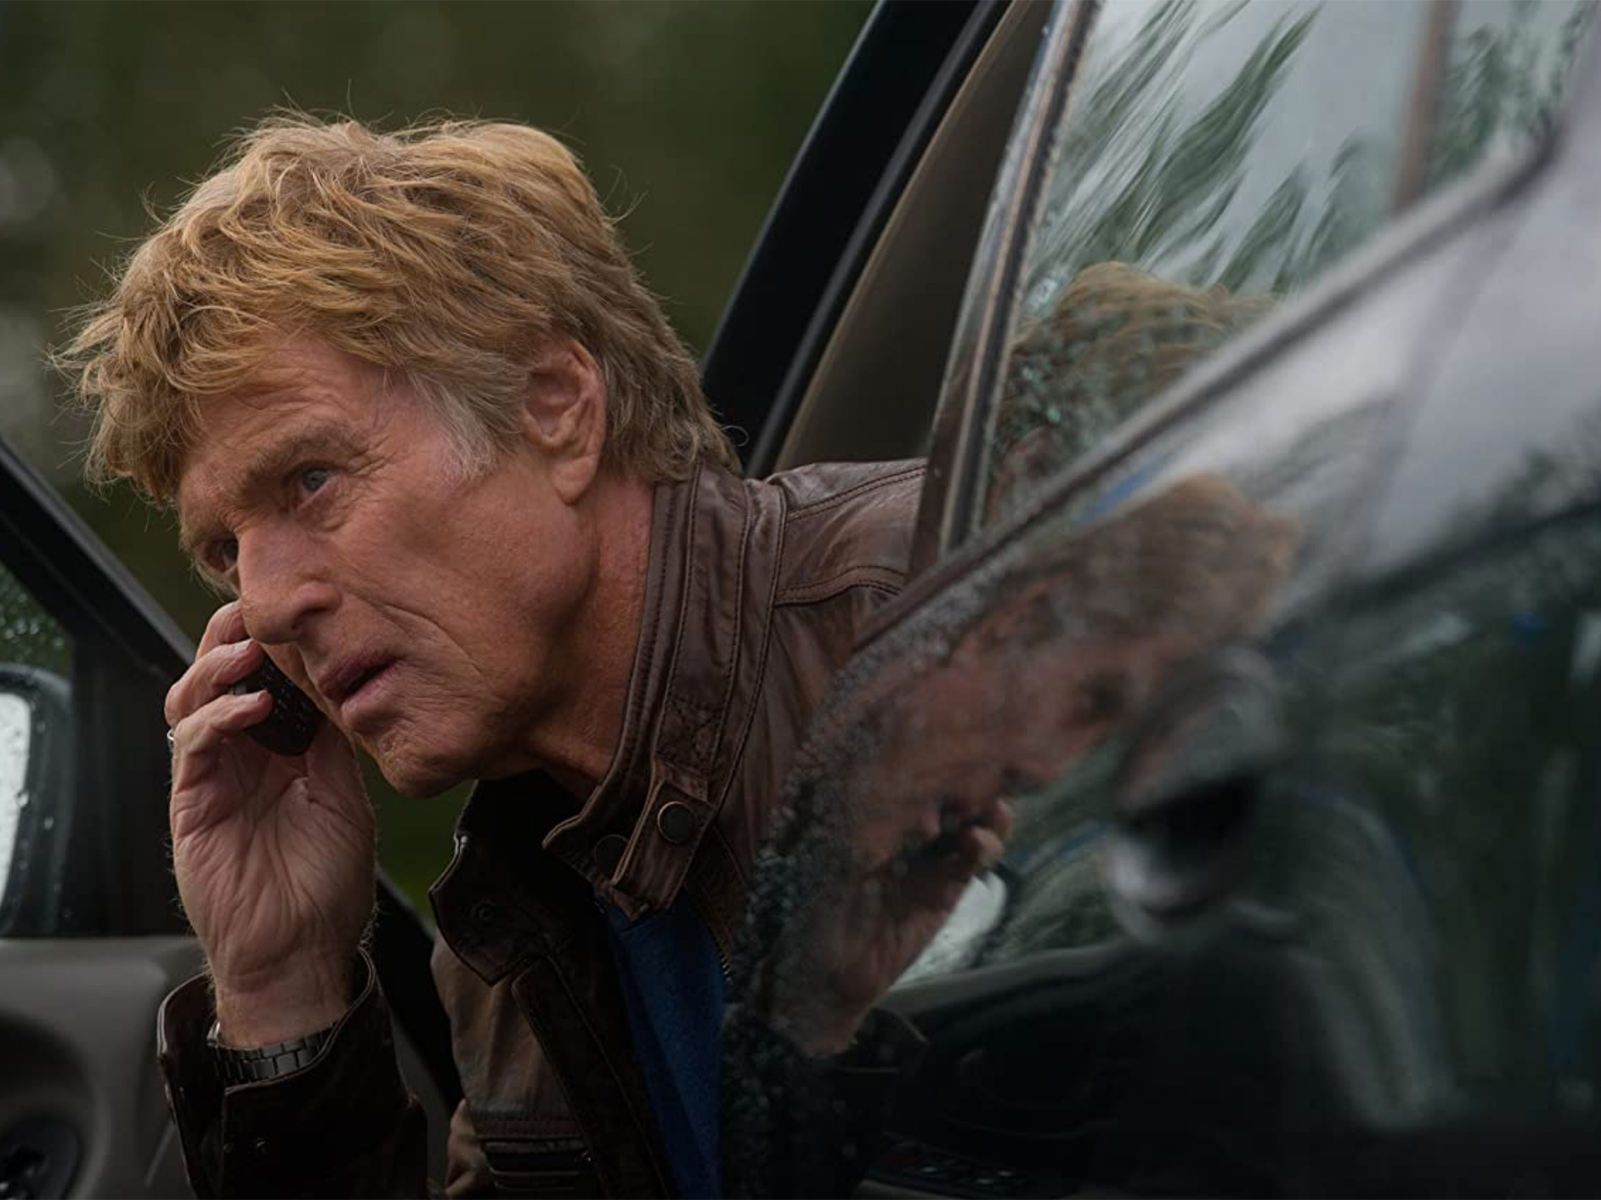 Robert Redford in “The Company You Keep” (2012)